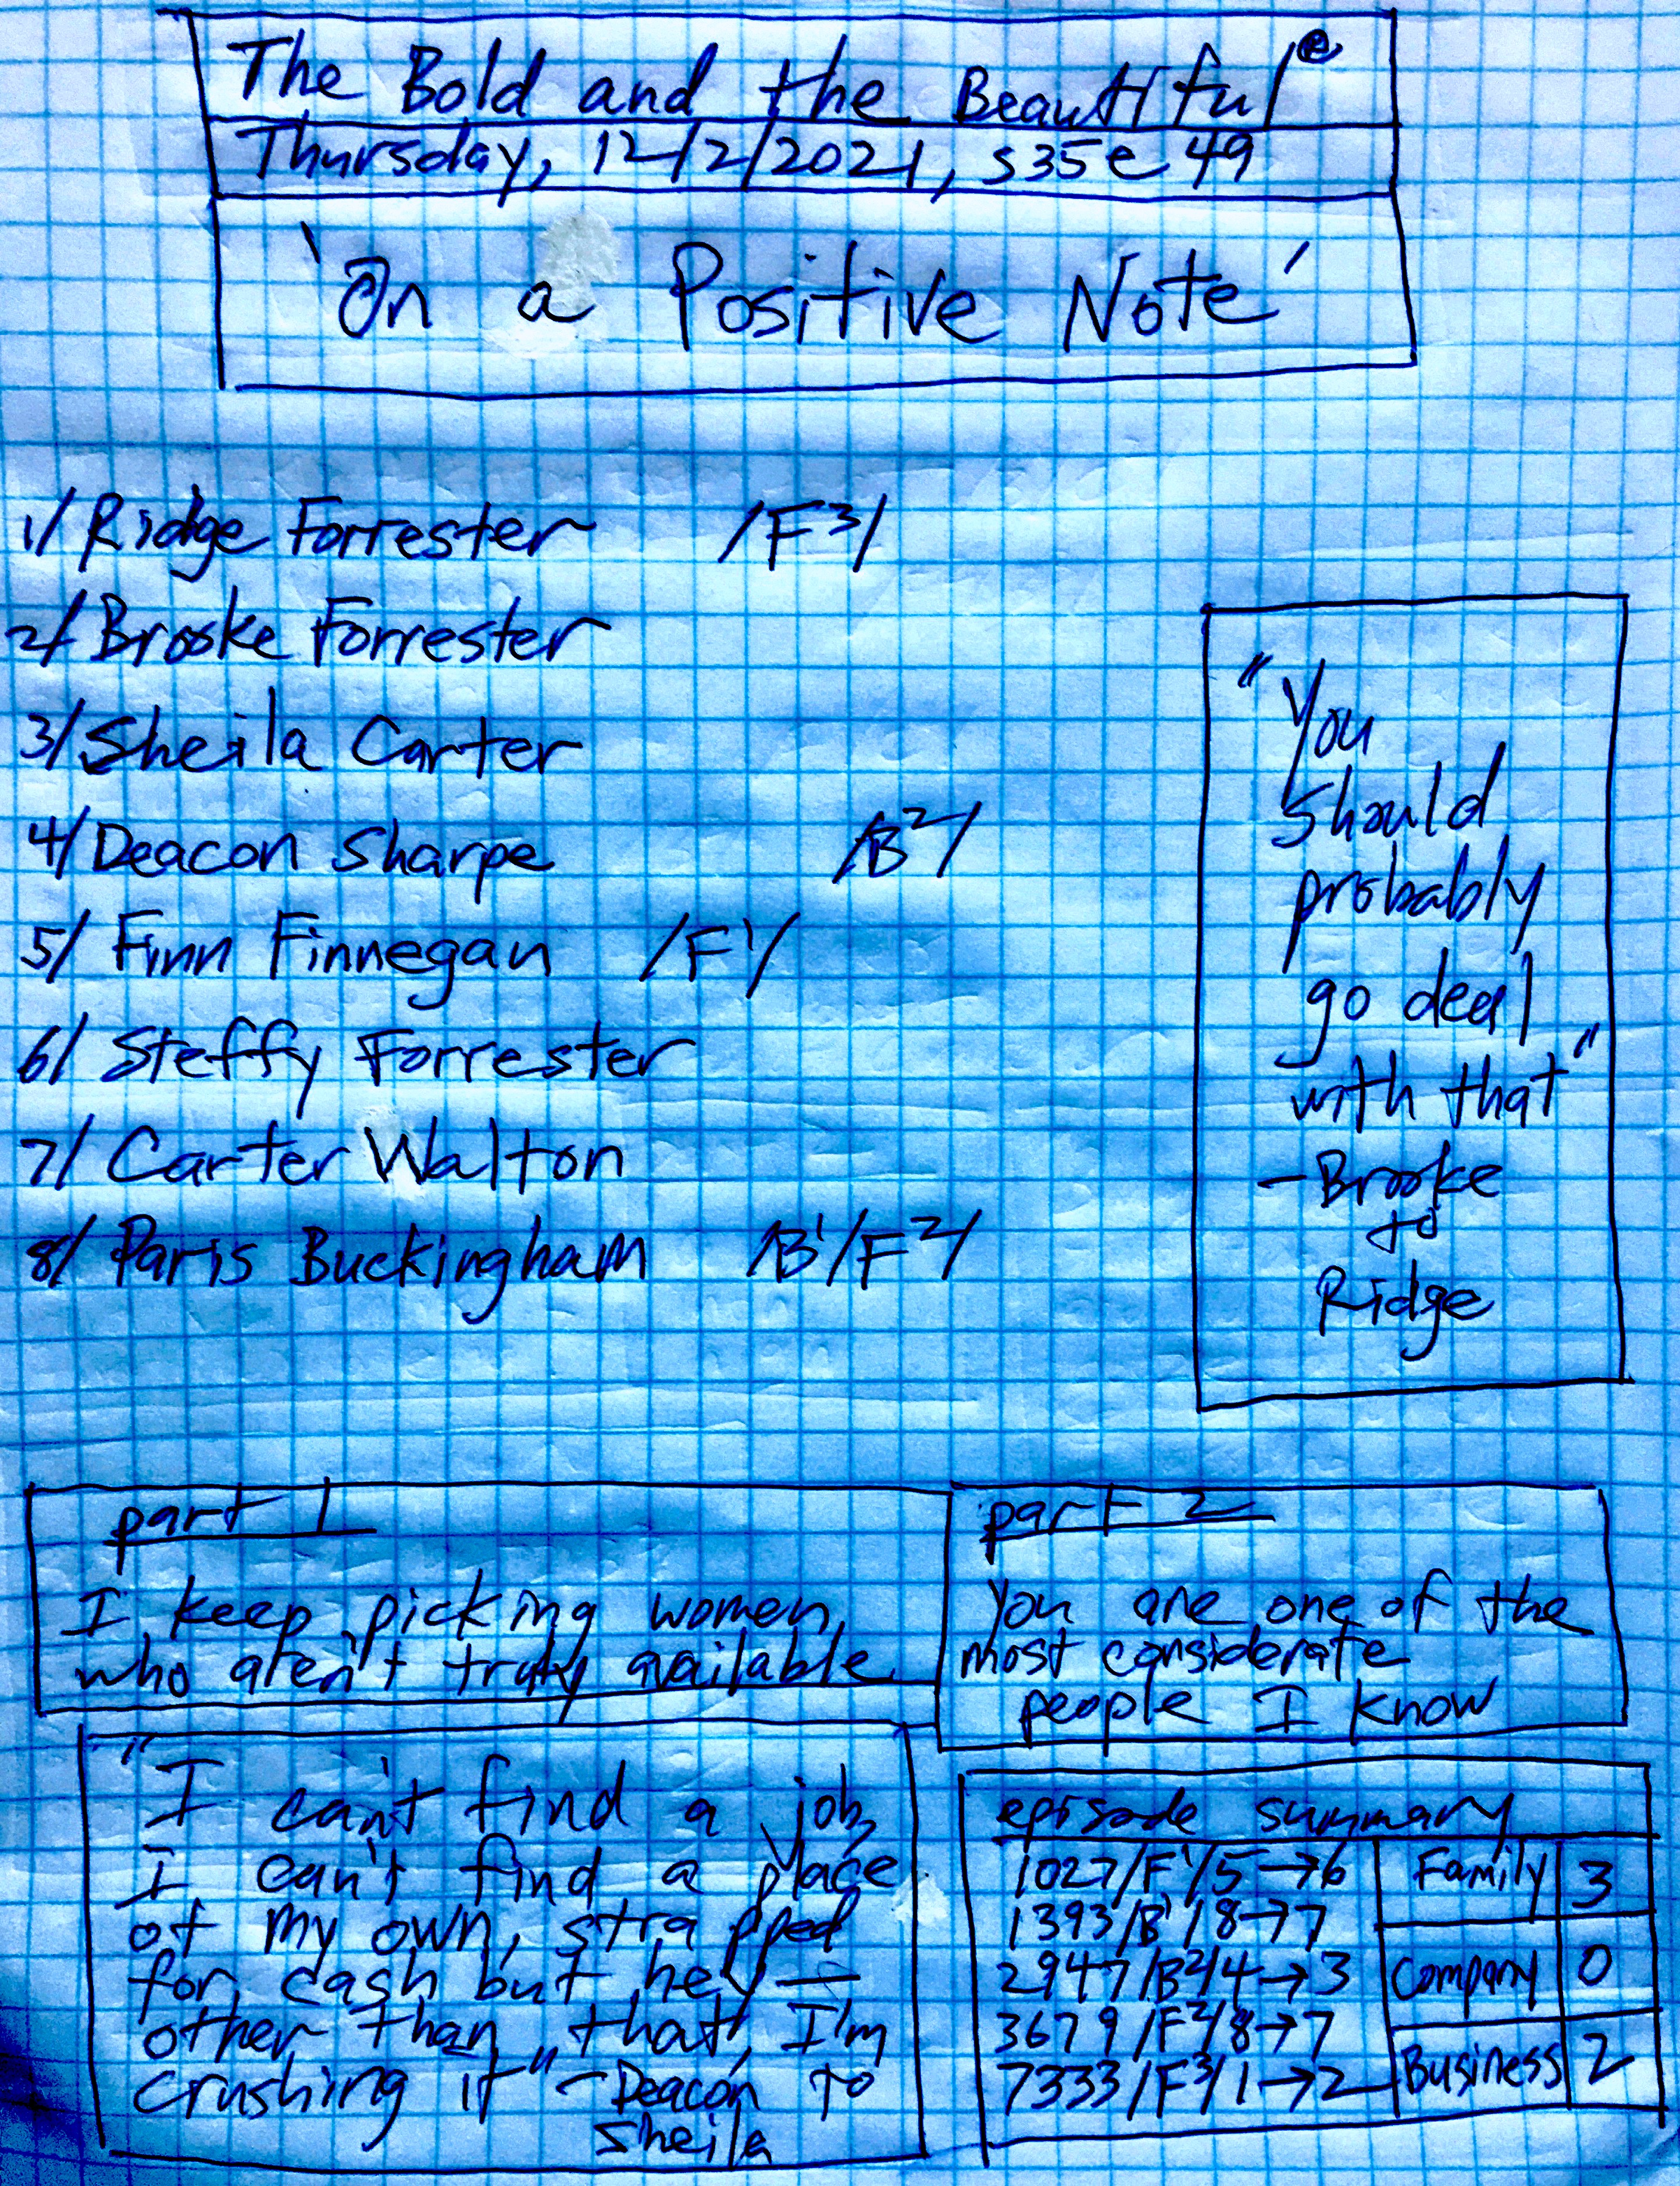 #bb-'On a Positive Note'-s35e49-notes-on-family-company-business- aired 12/2/2021